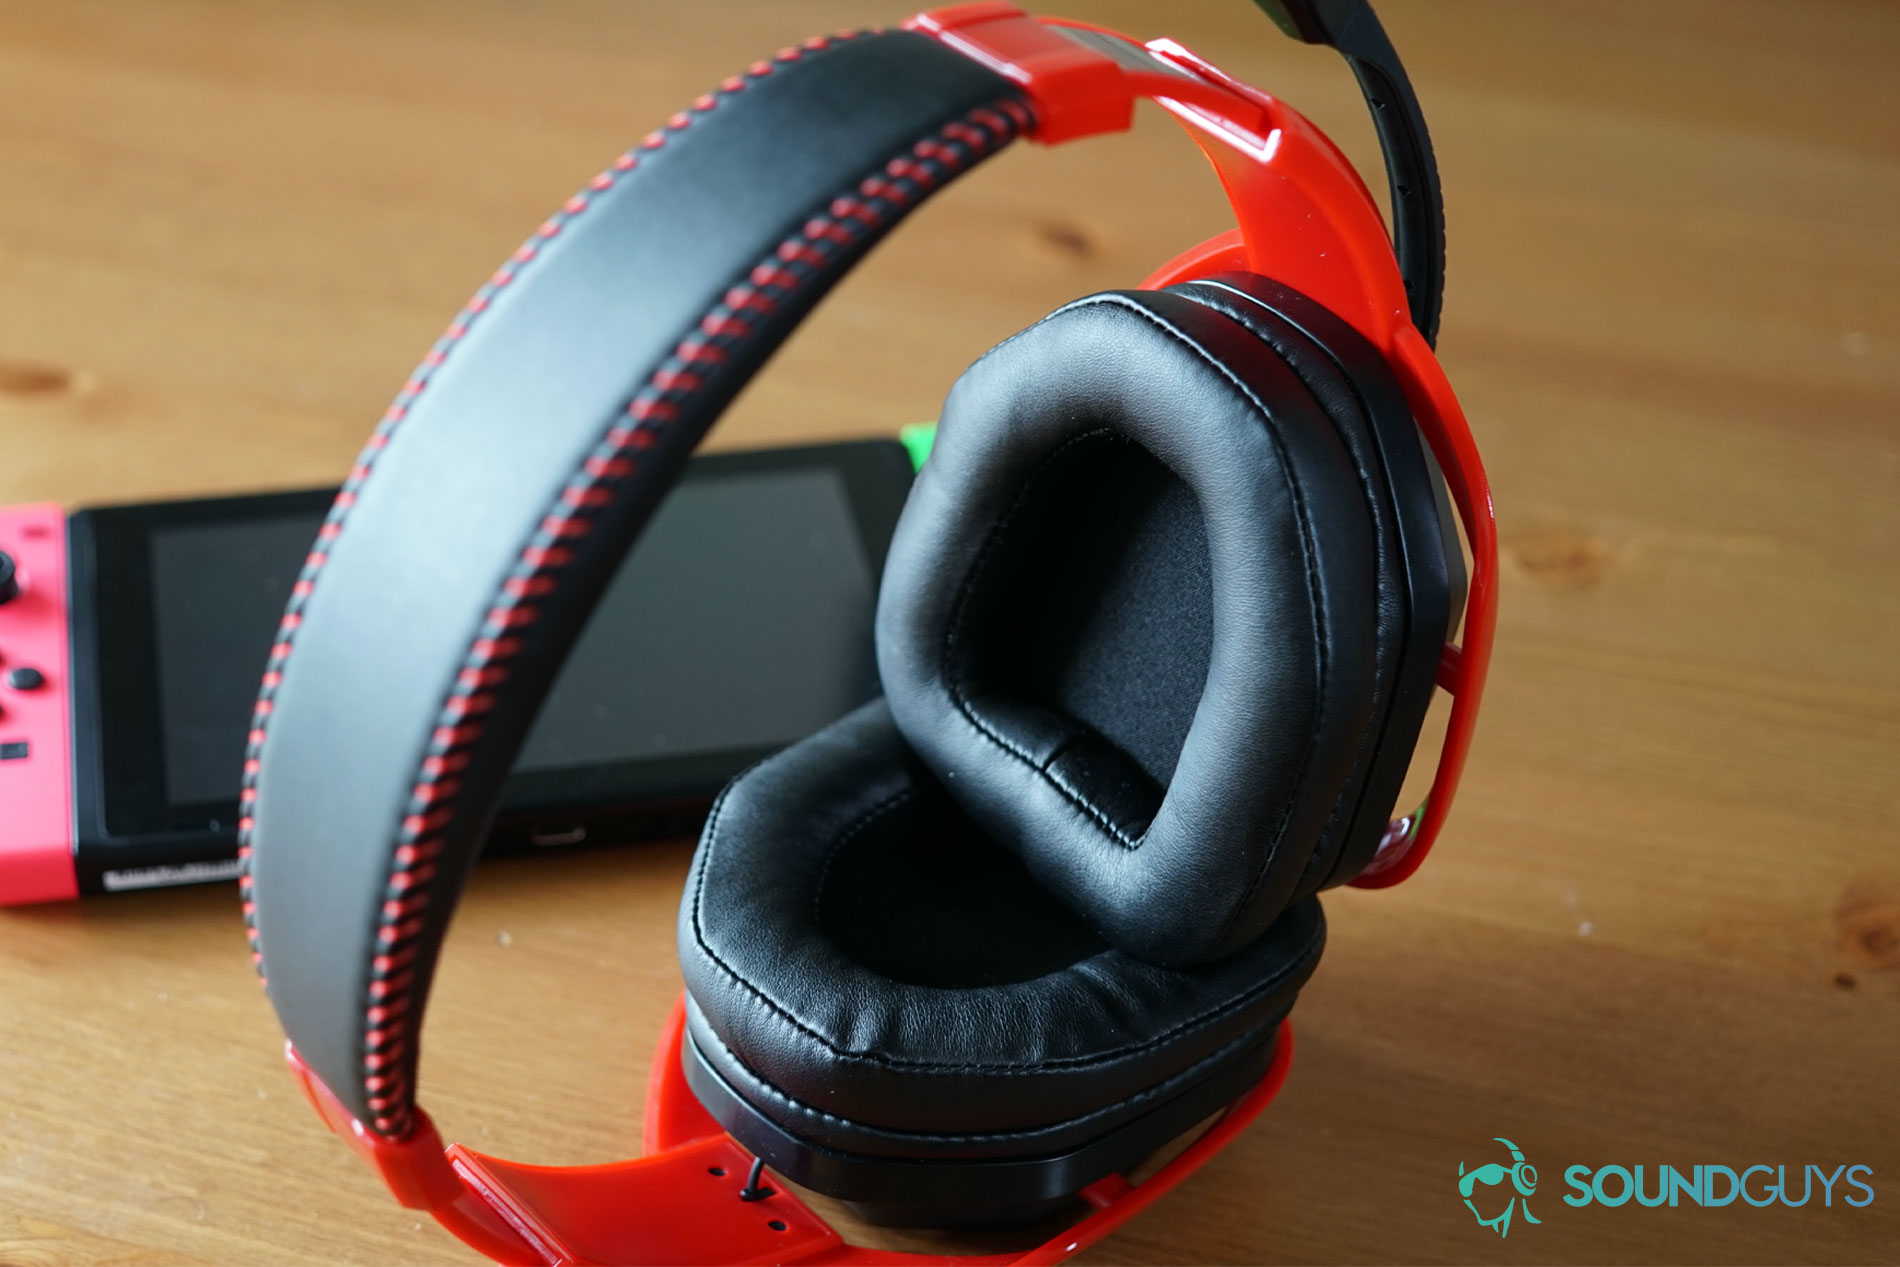 The AmazonBasics Pro Gaming Headset lying on it's side next to a Nintendo Switch on a wooden table.